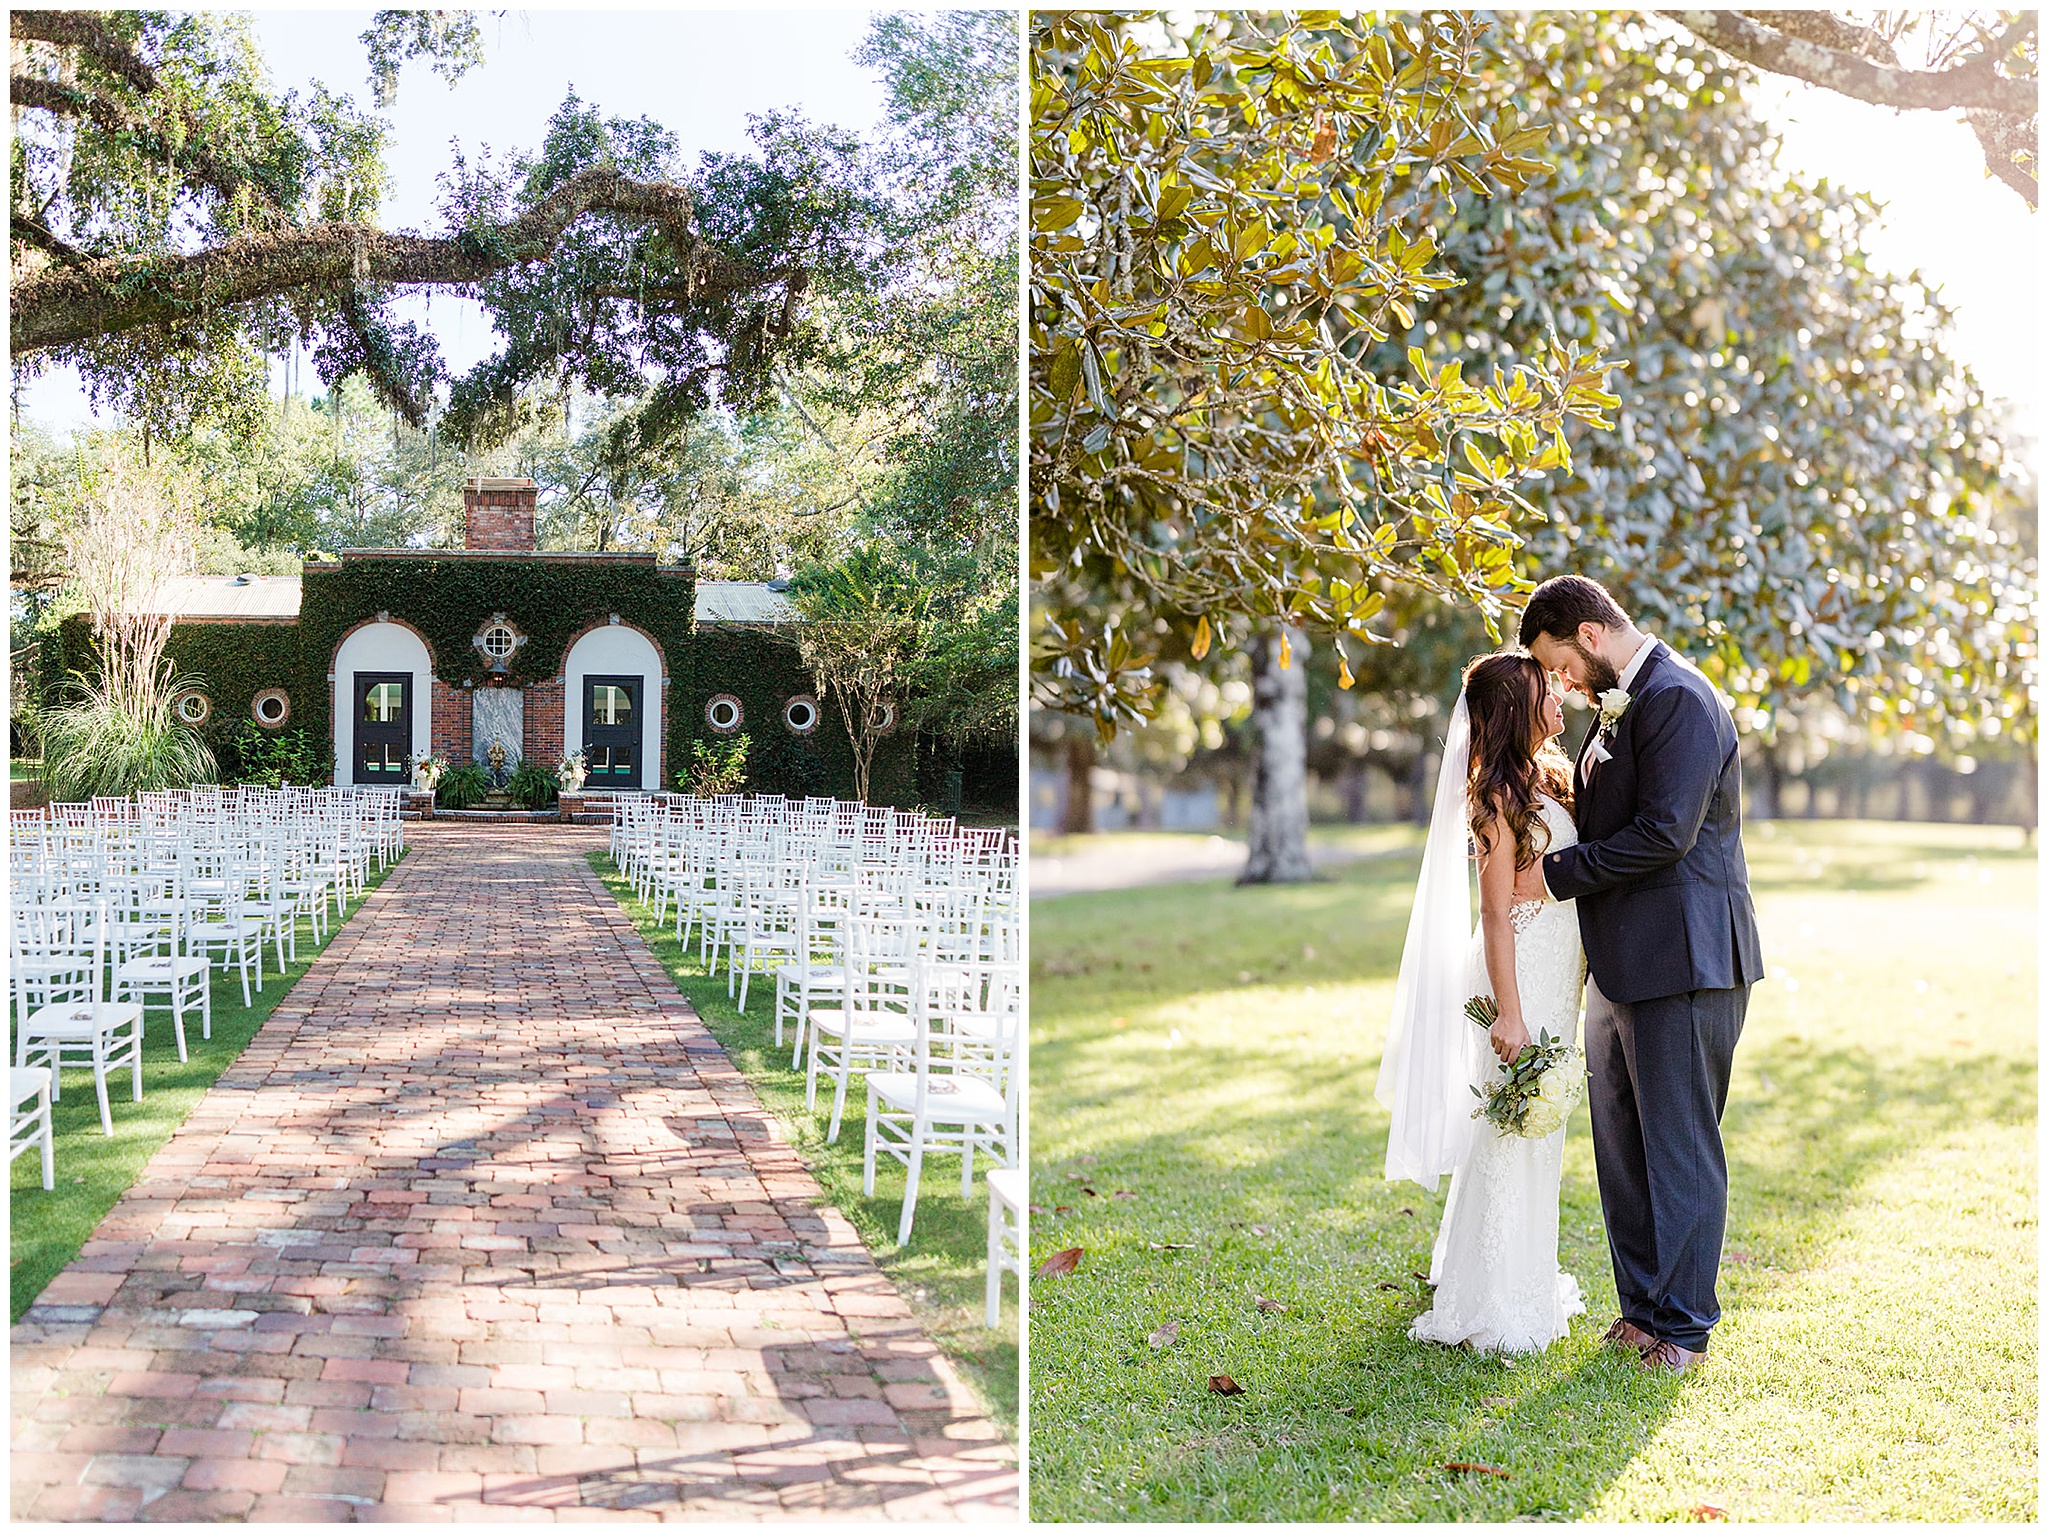 Newlyweds stand forehead to forehead under a large magnolia tree in a grassy lawn